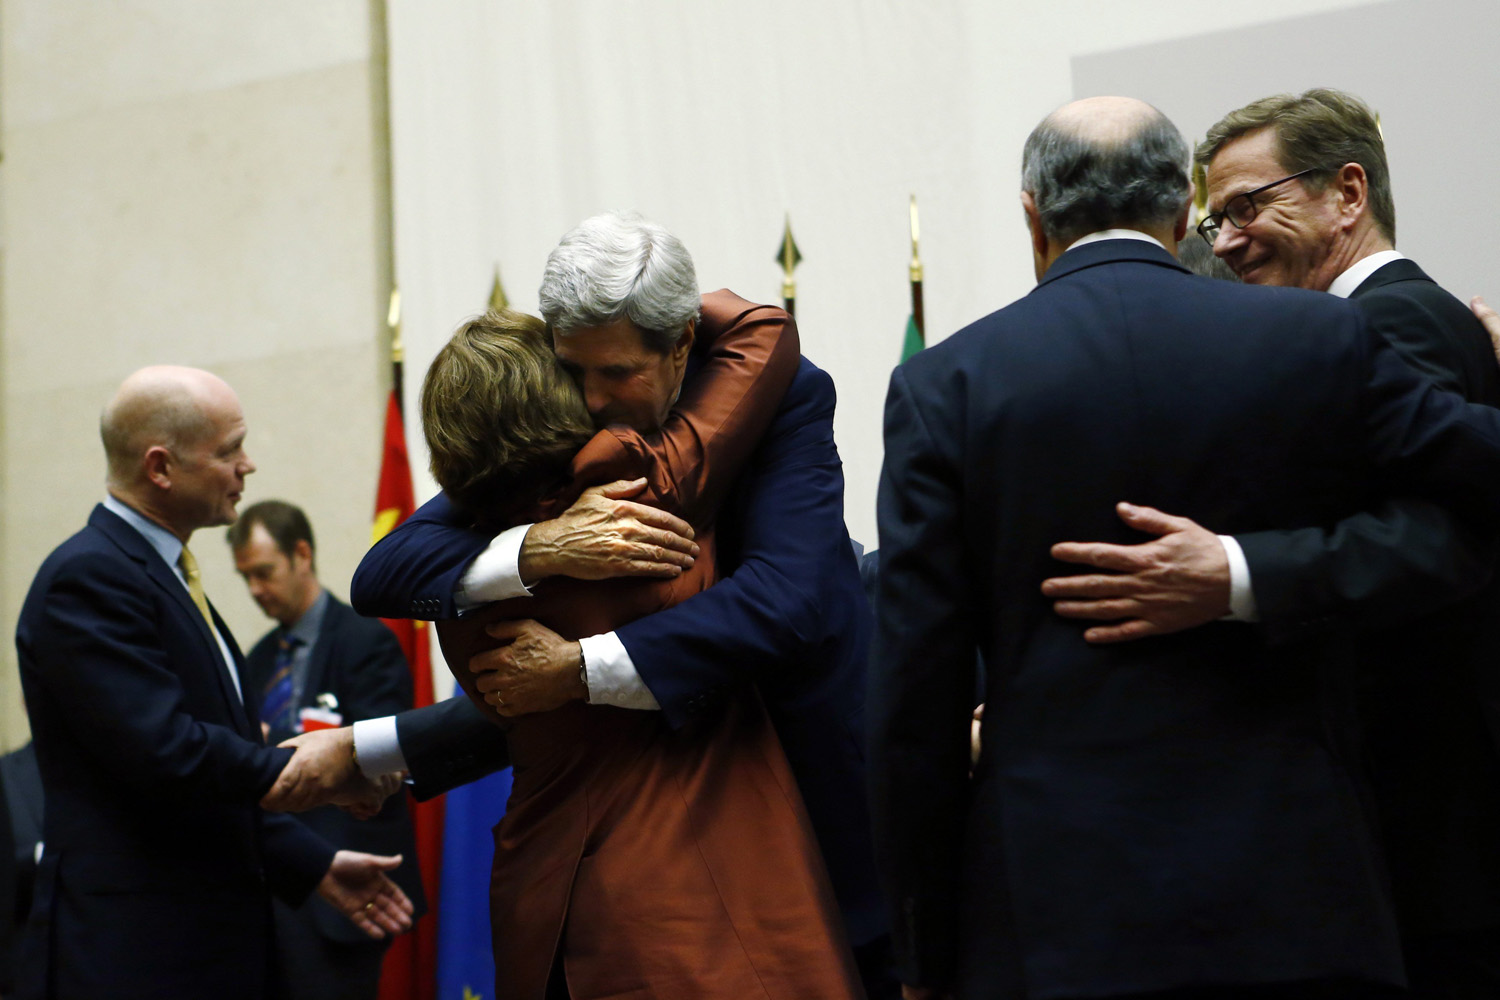 US Secretary of State Kerry hugs European Union foreign policy chief Ashton after she delivered a statement during a ceremony at the United Nations in Geneva